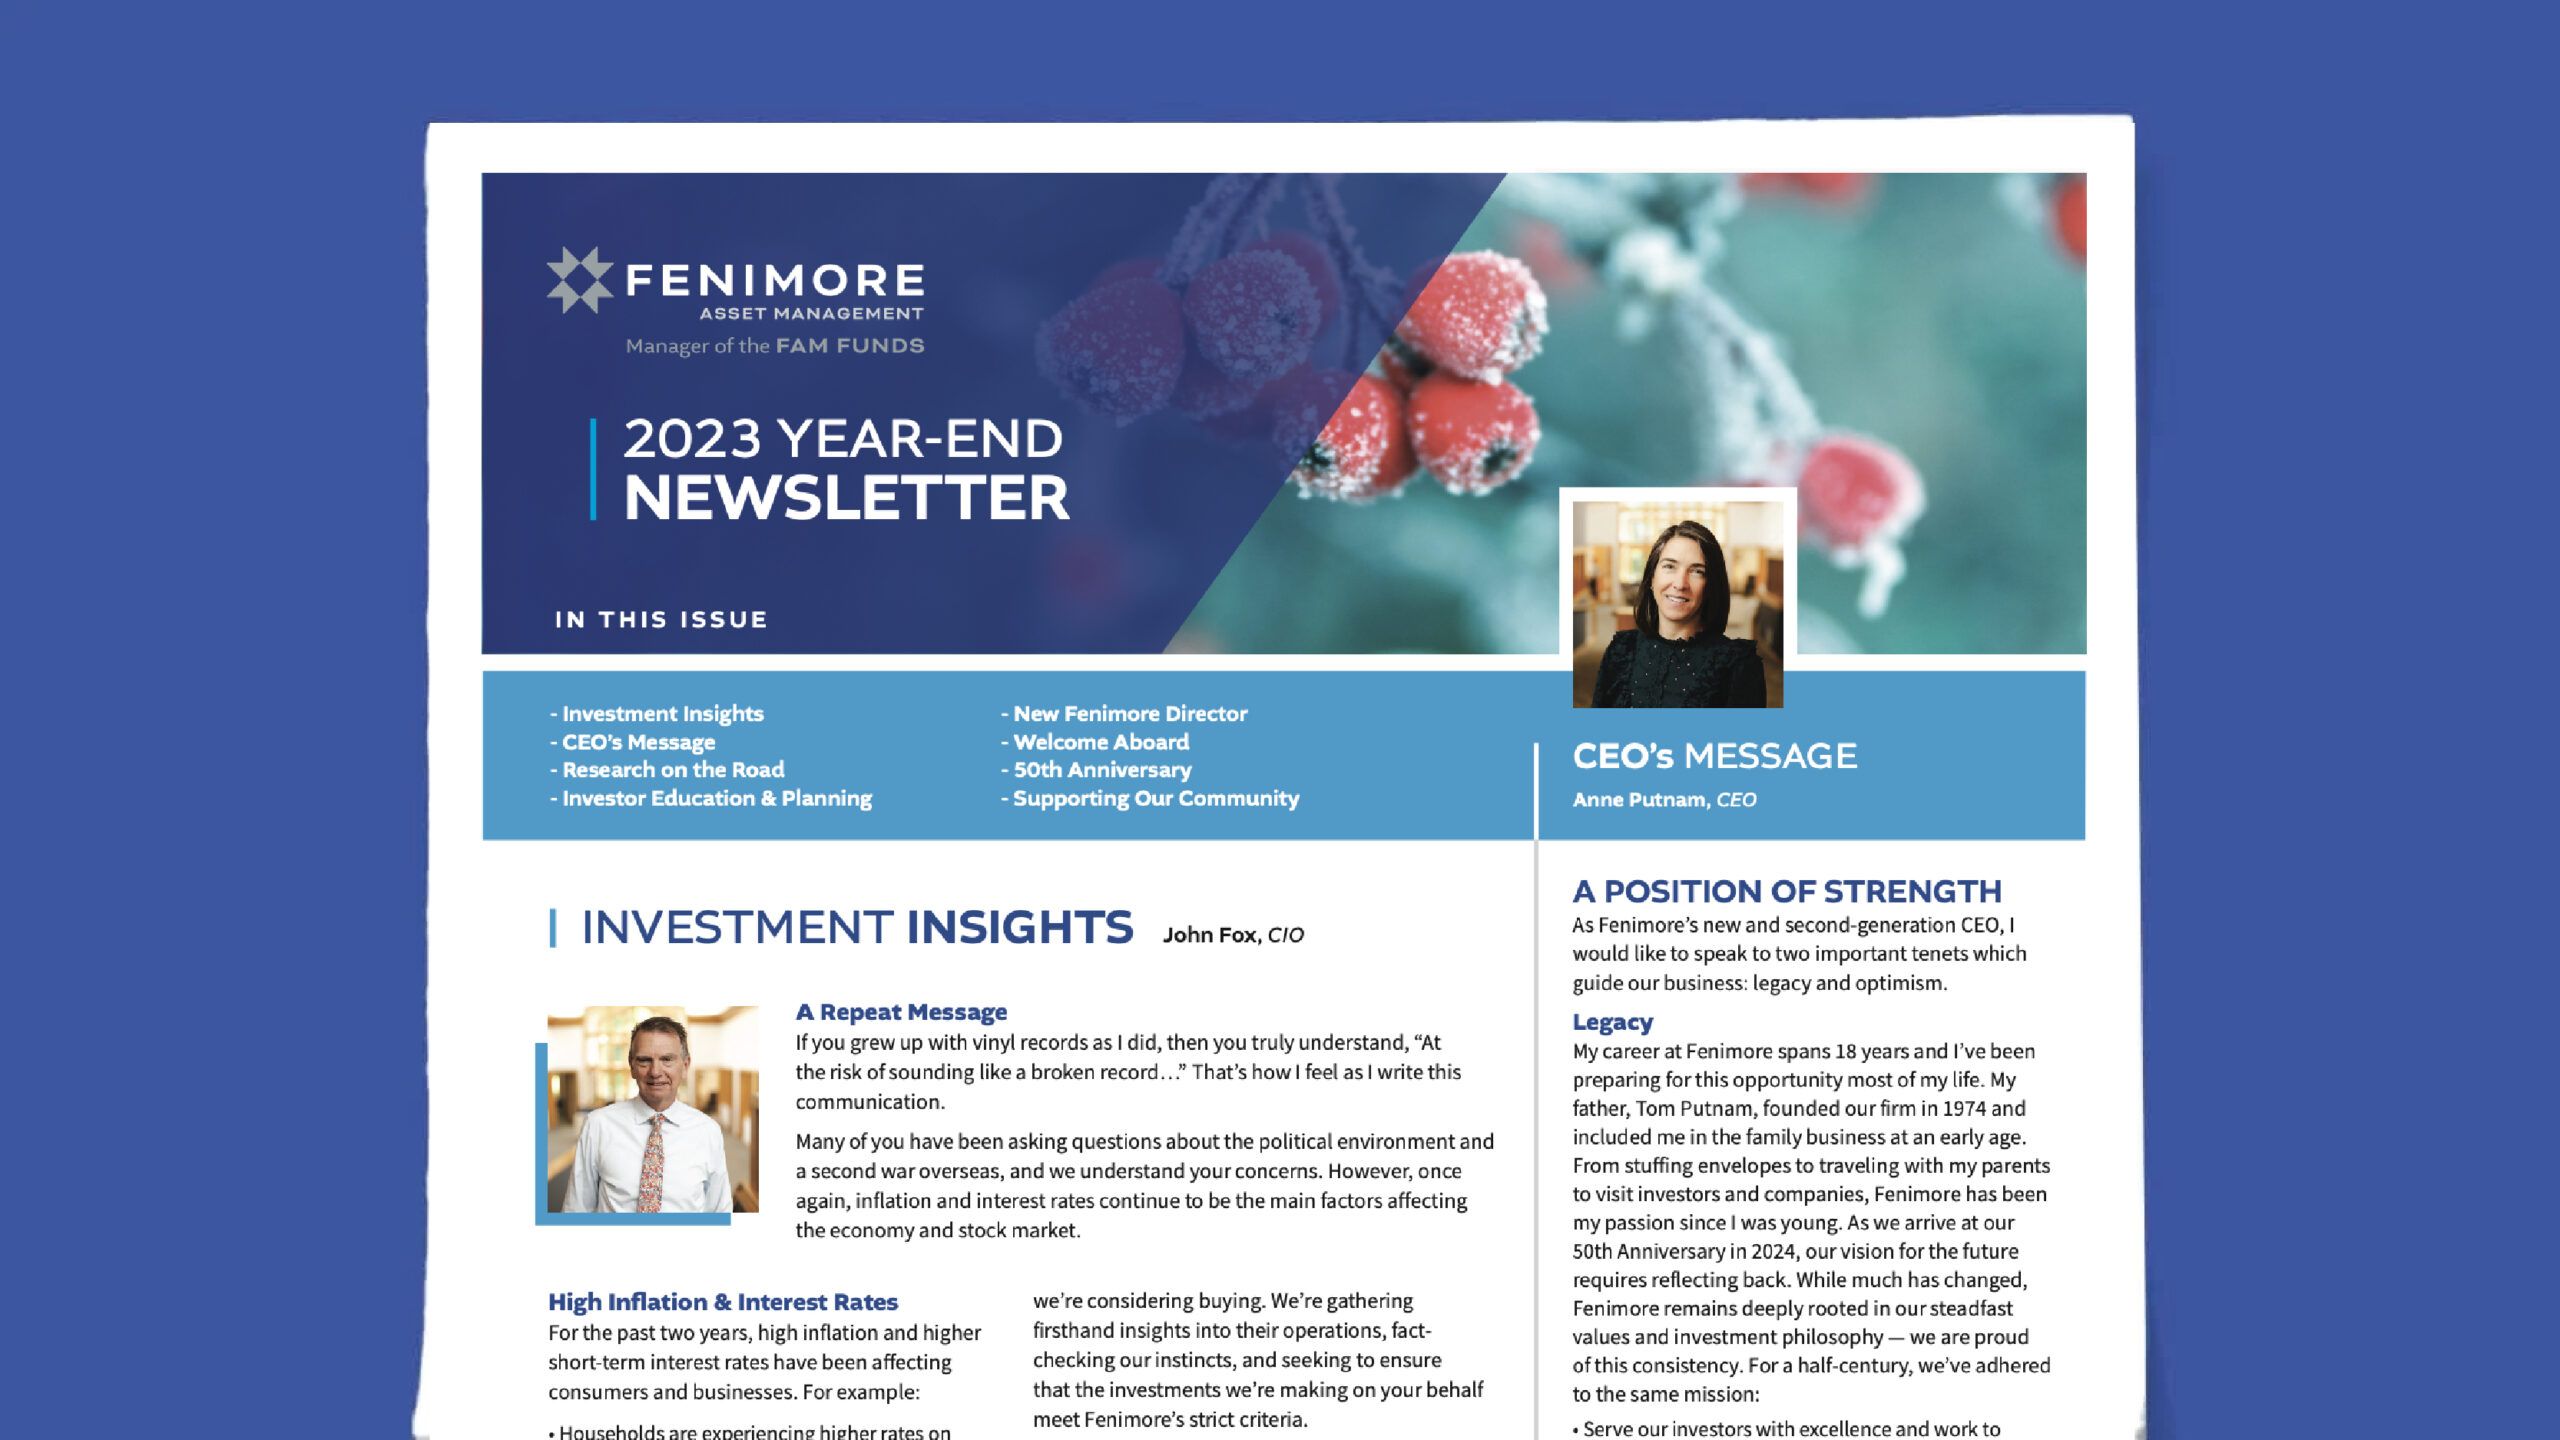 
Fenimore’s 2022 Year-End Newsletter
